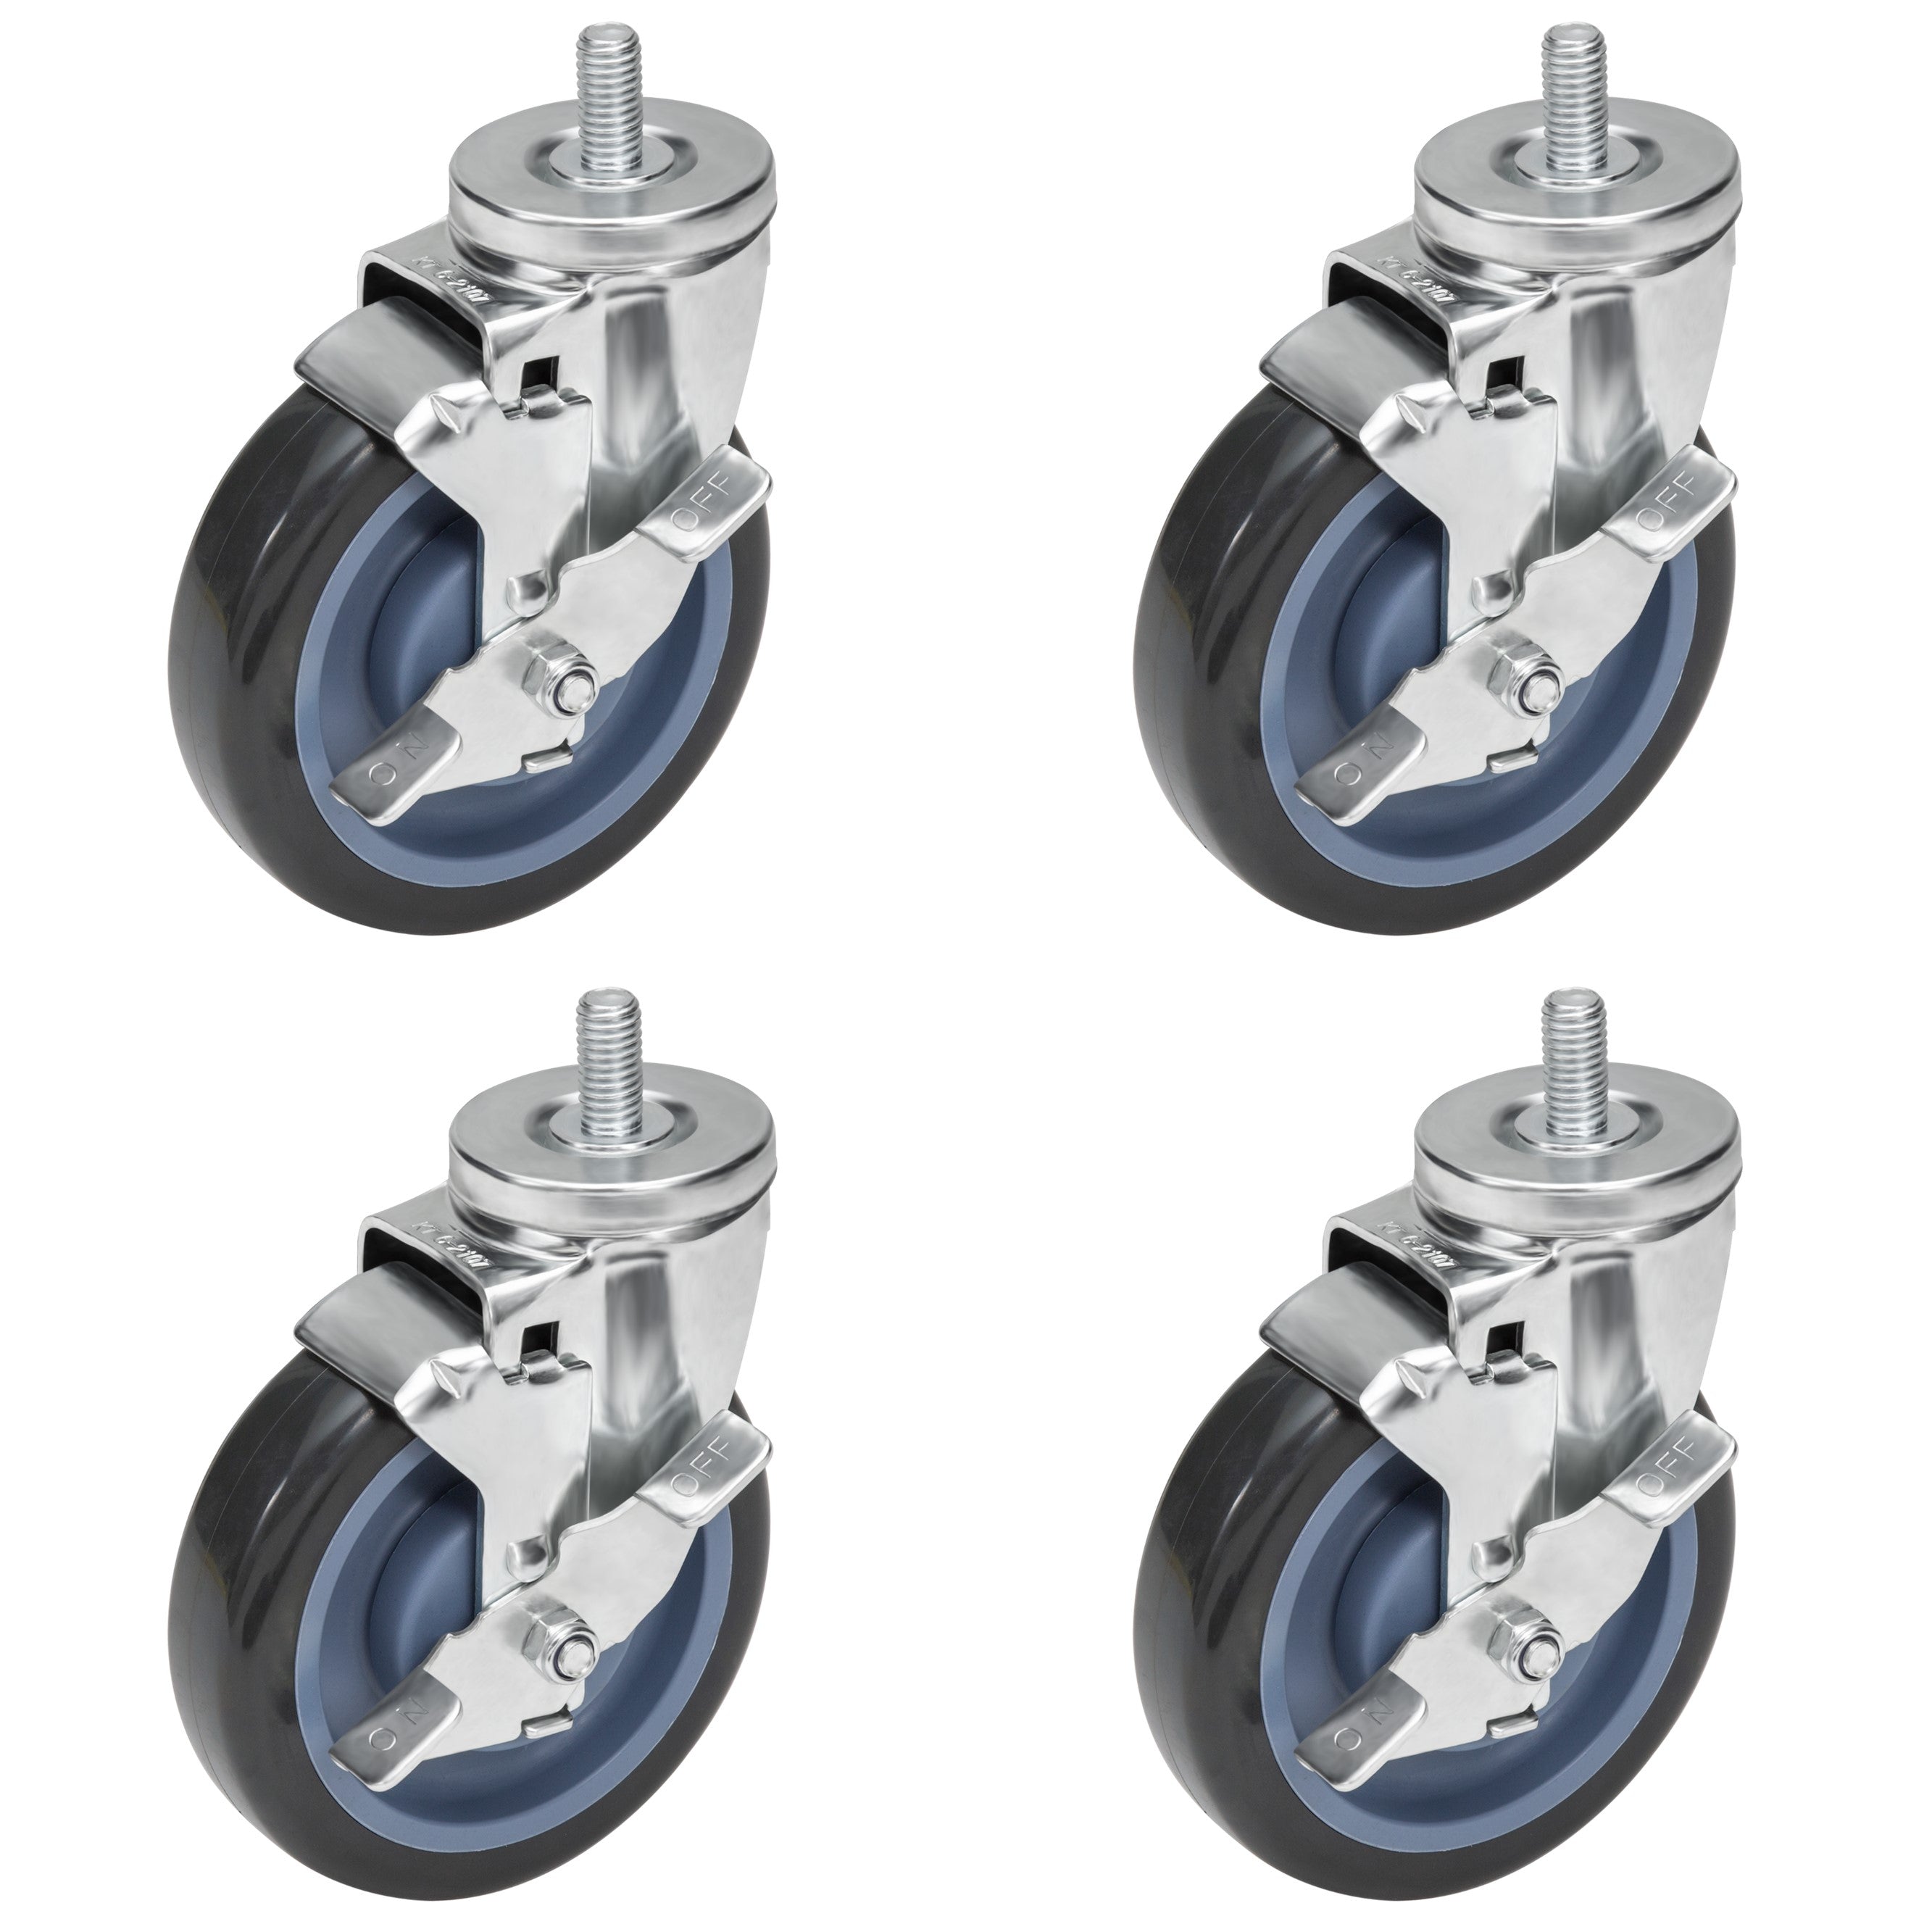 GSW 2" Caster Replacement Cart Wheels, Polyurethane Stem Casters Set of 4 for GSW Cart (C-SCE), Platform Cart, Industrial Cart with Loading Capacity of 800 Lbs (Swivel with Brake)